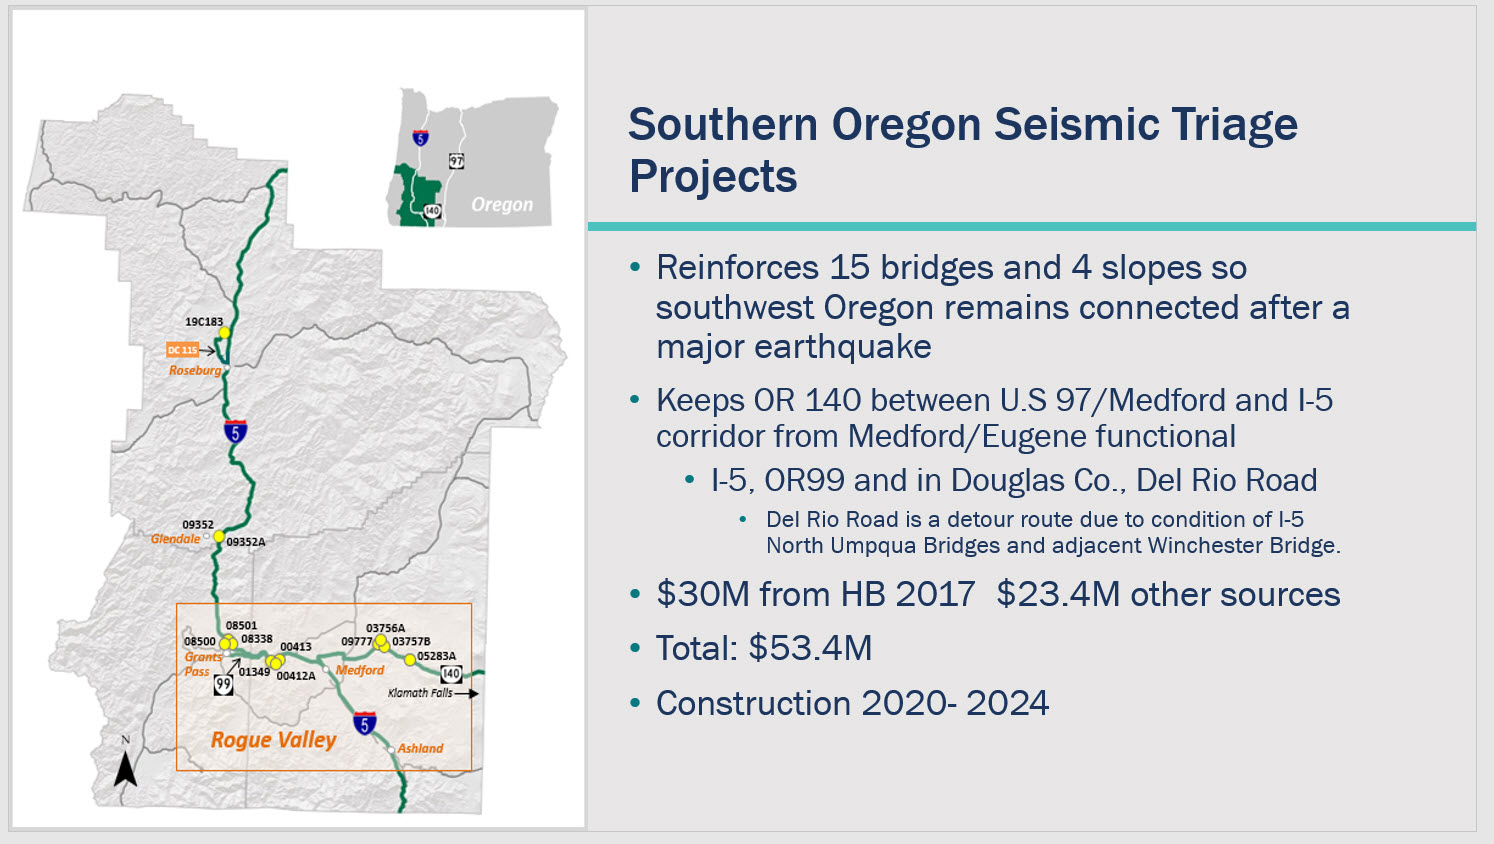 Overview of the Seismic Triage projects in southern Oregon